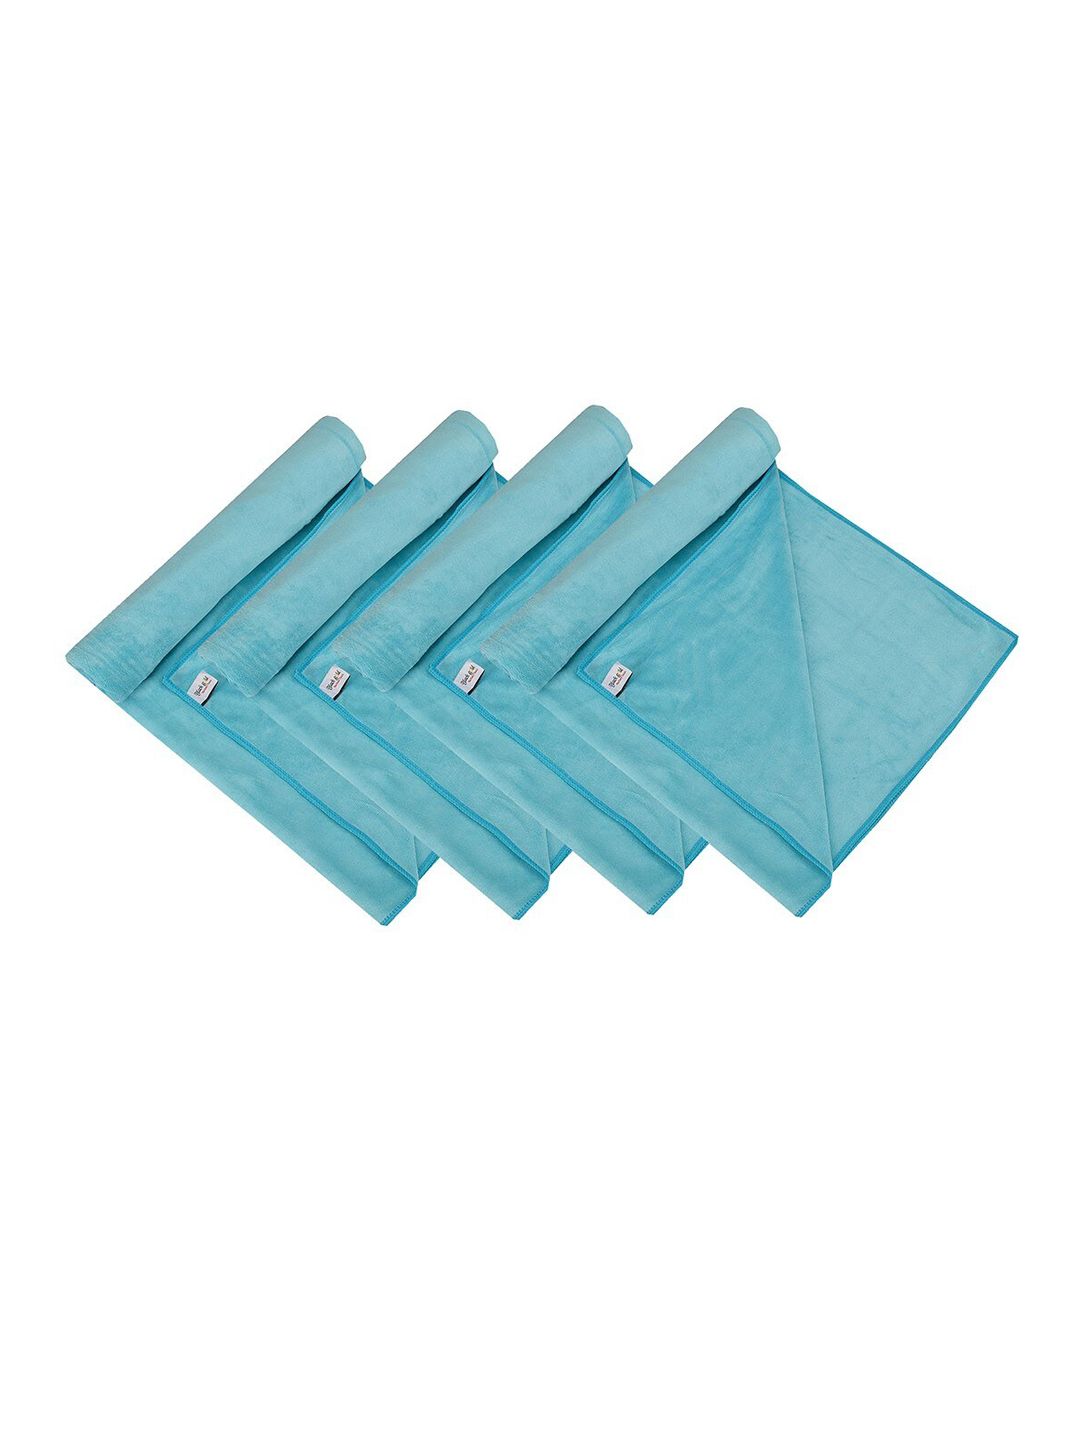 Black gold Set Of 4 Blue Solid 400 GSM Microfiber Bath Towels Price in India